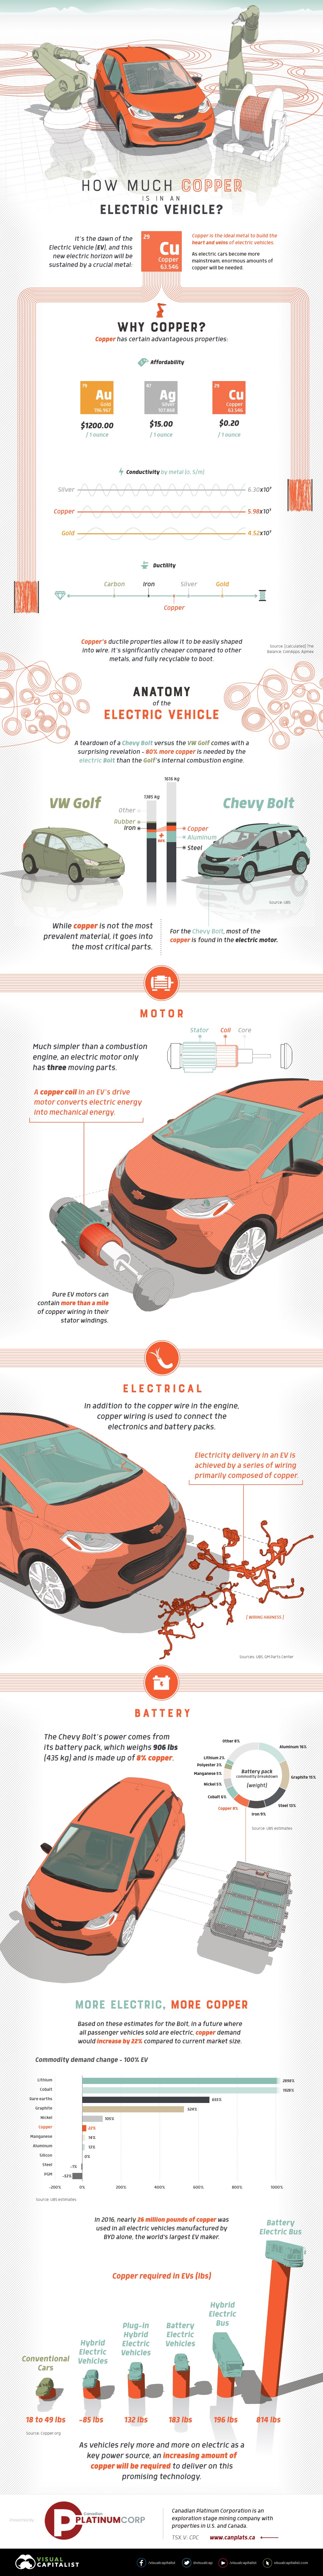 How Much Copper is in an Electric Vehicle? #infographic